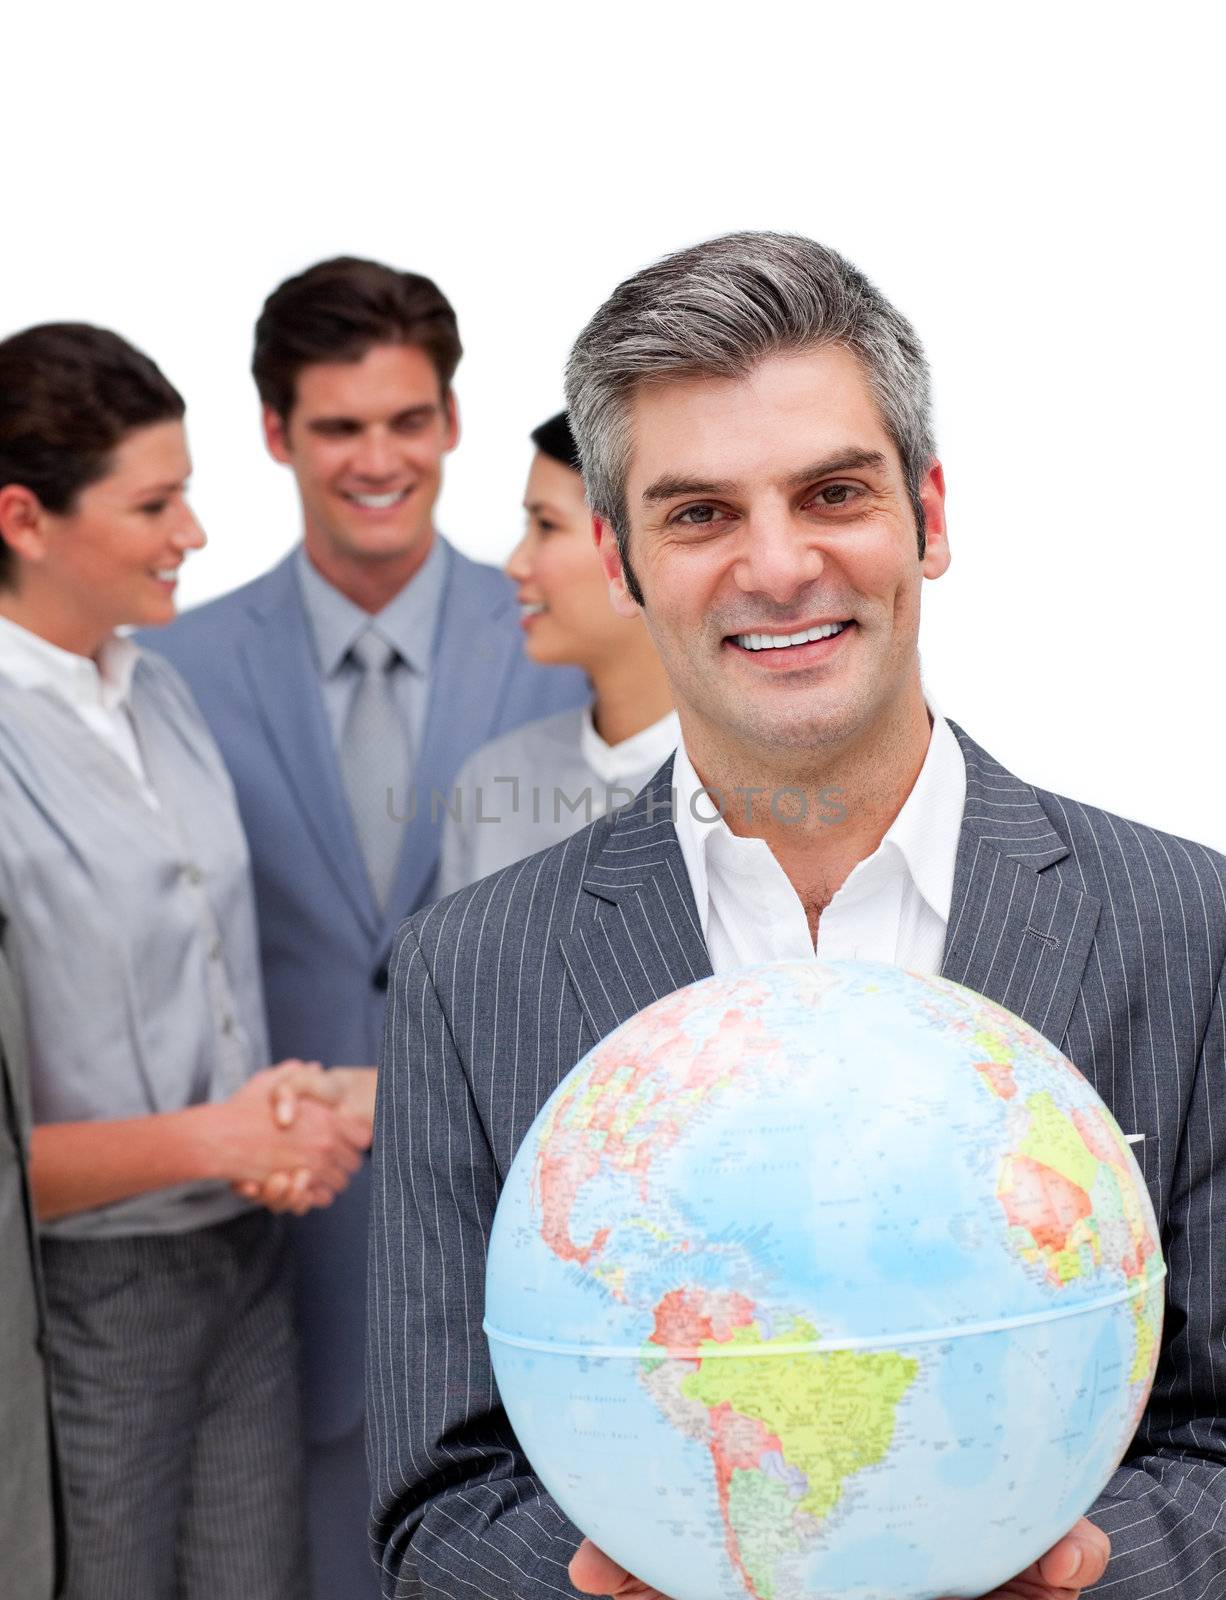 Ambitious manager and his team holding a terrestrial globe by Wavebreakmedia